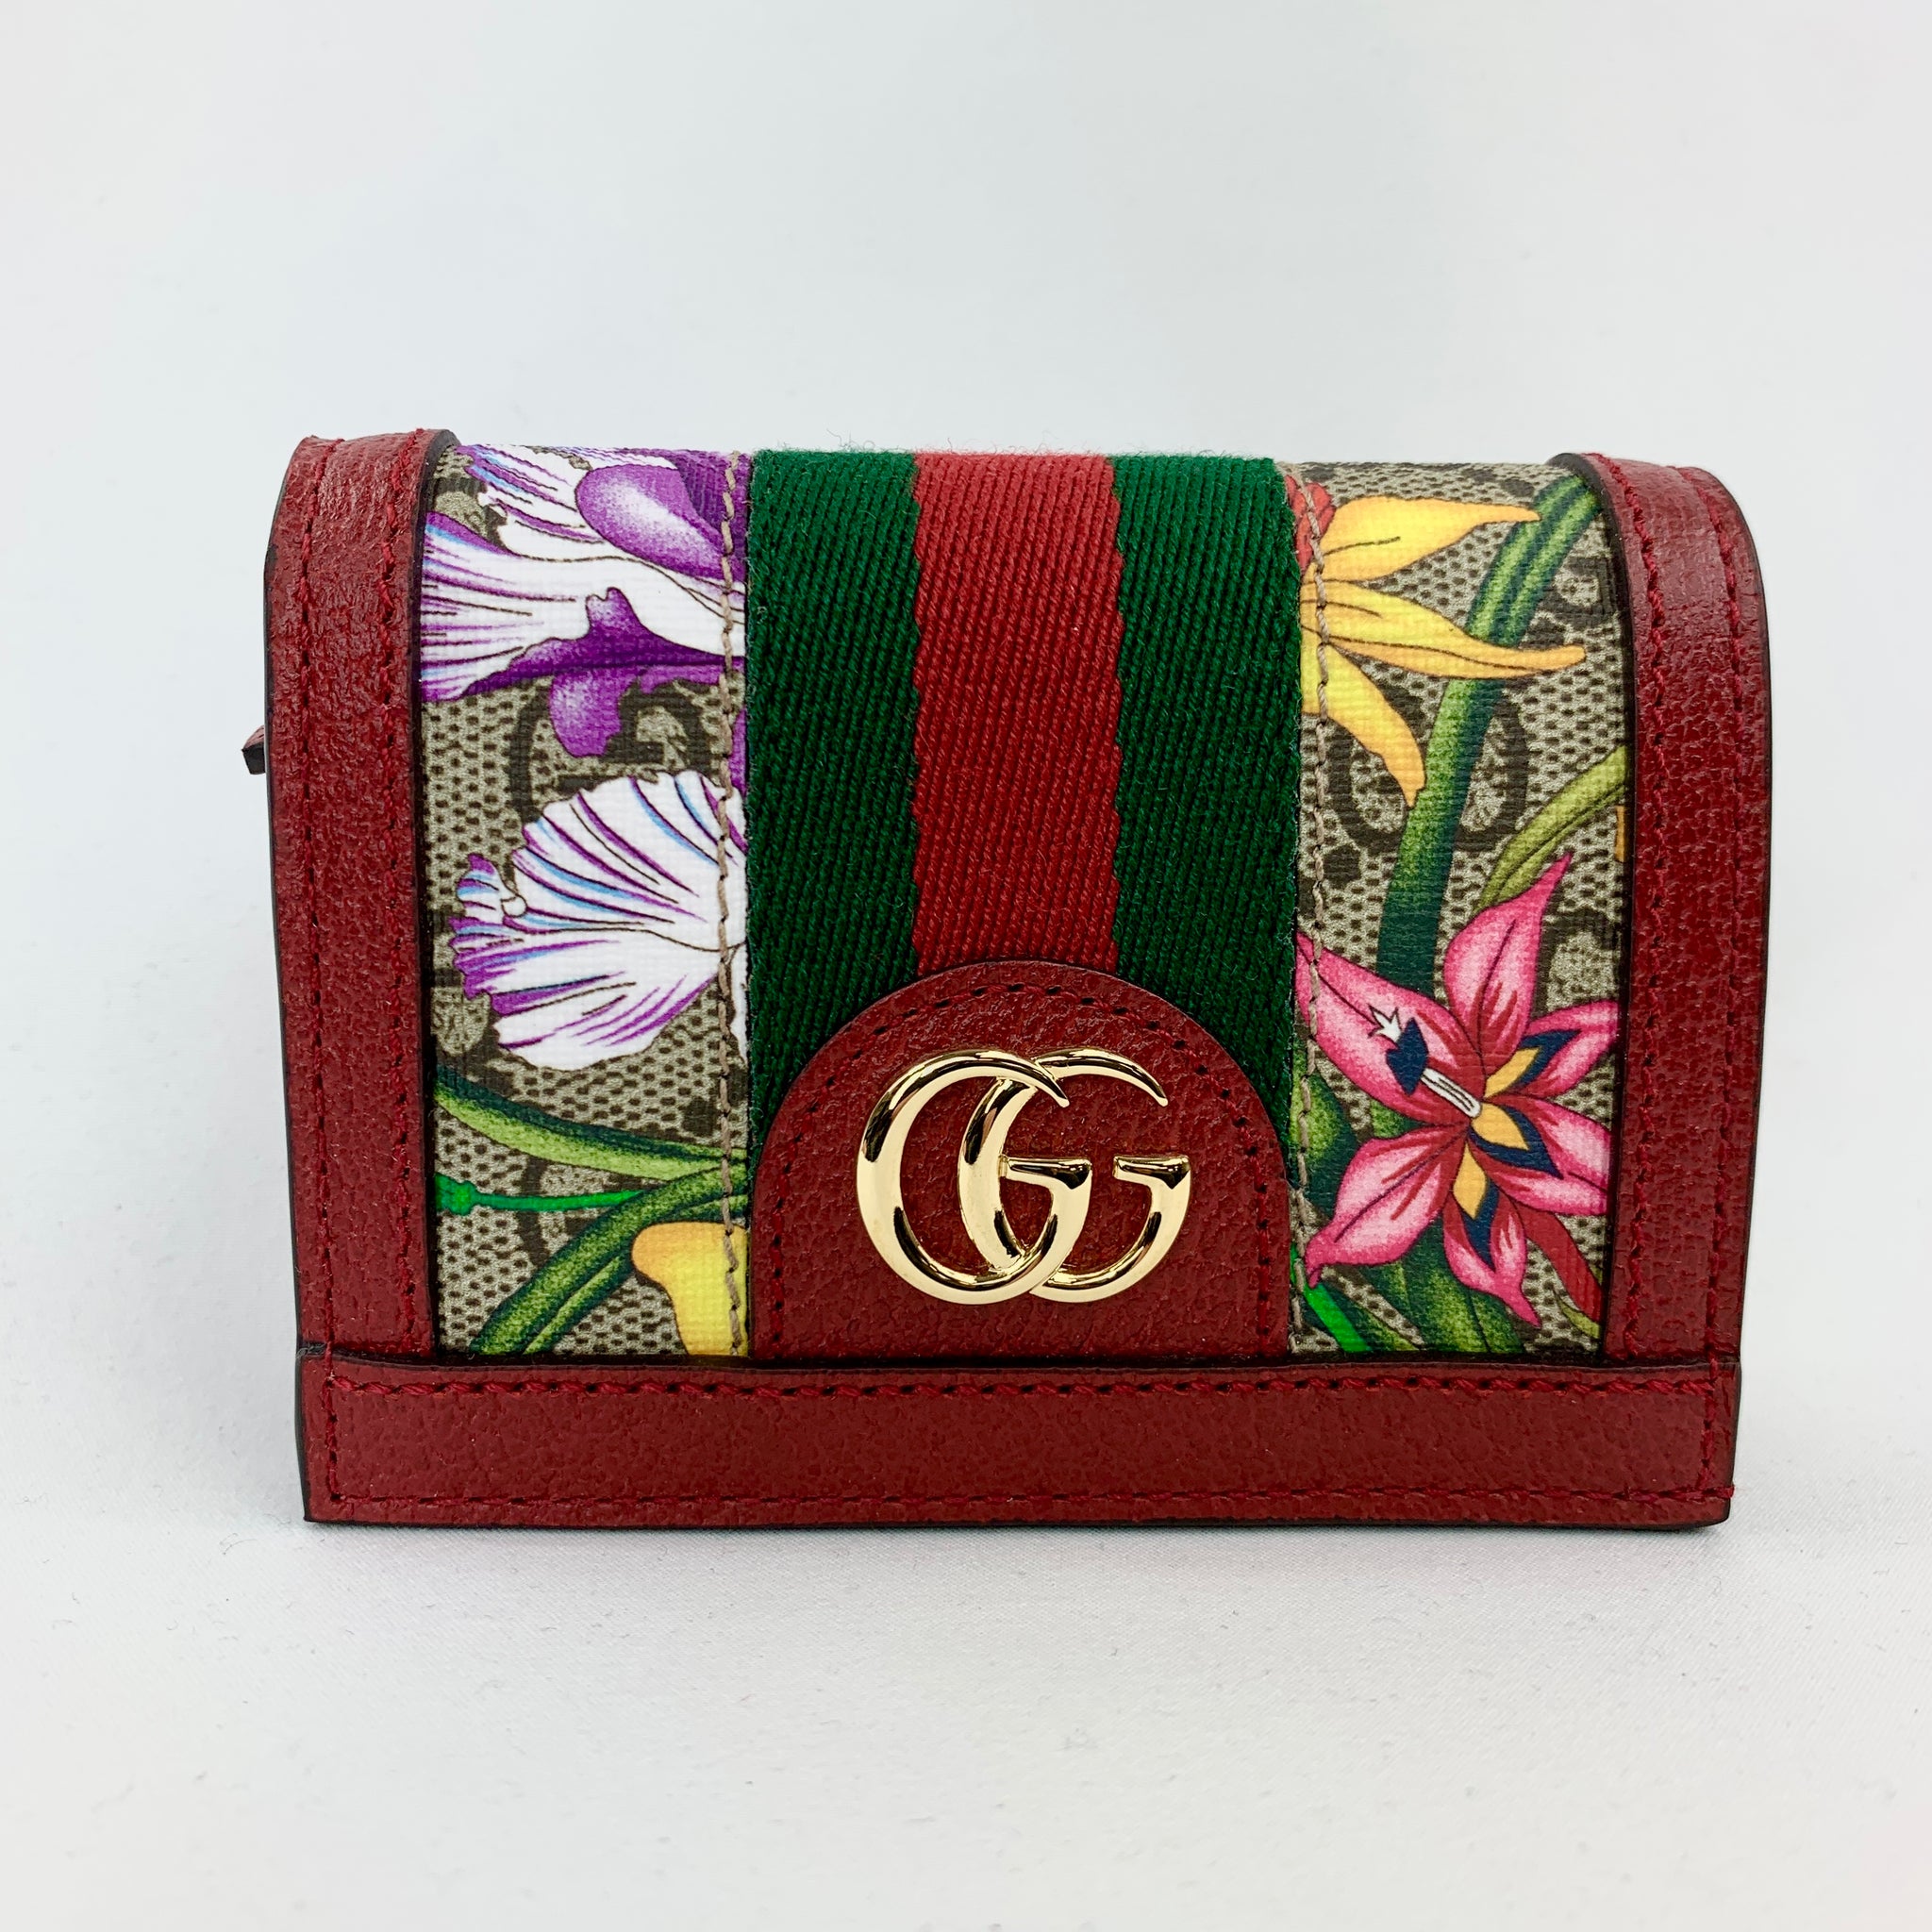 Ophidia GG Supreme wallet